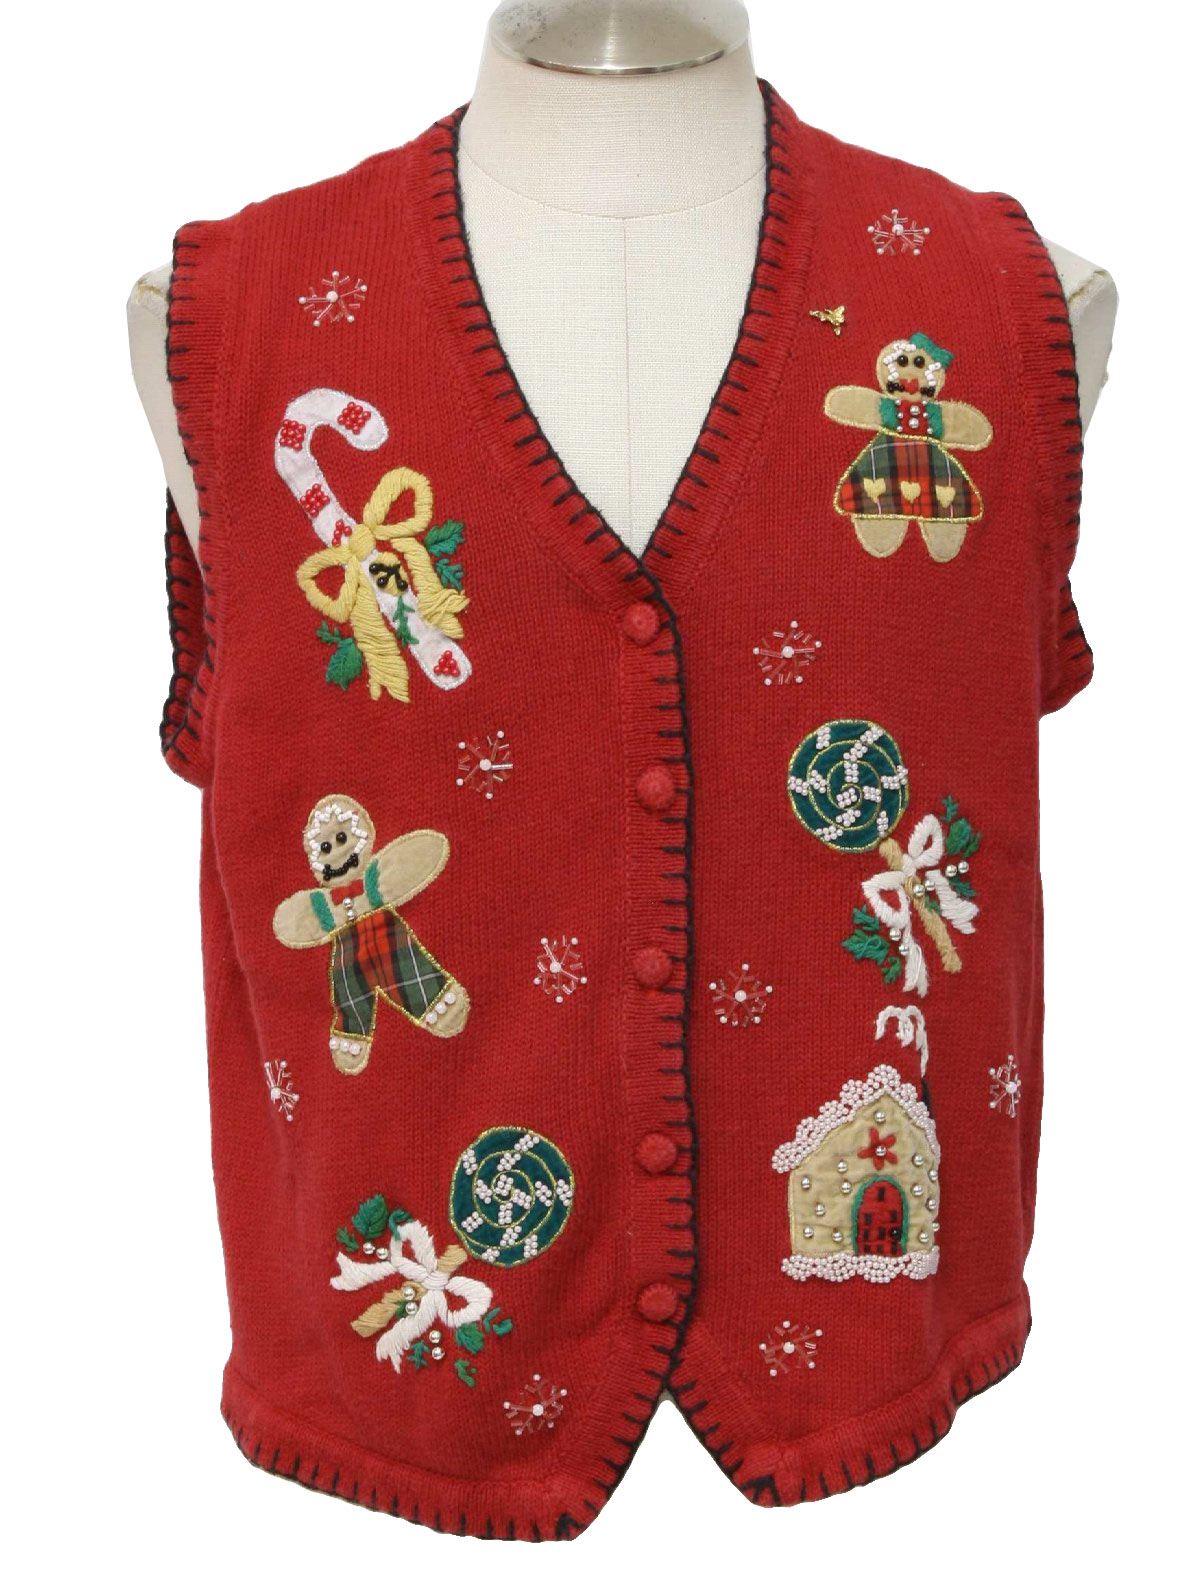 Ugly Christmas Sweater Vest : -B.P. Design- Unisex red background ramie ...